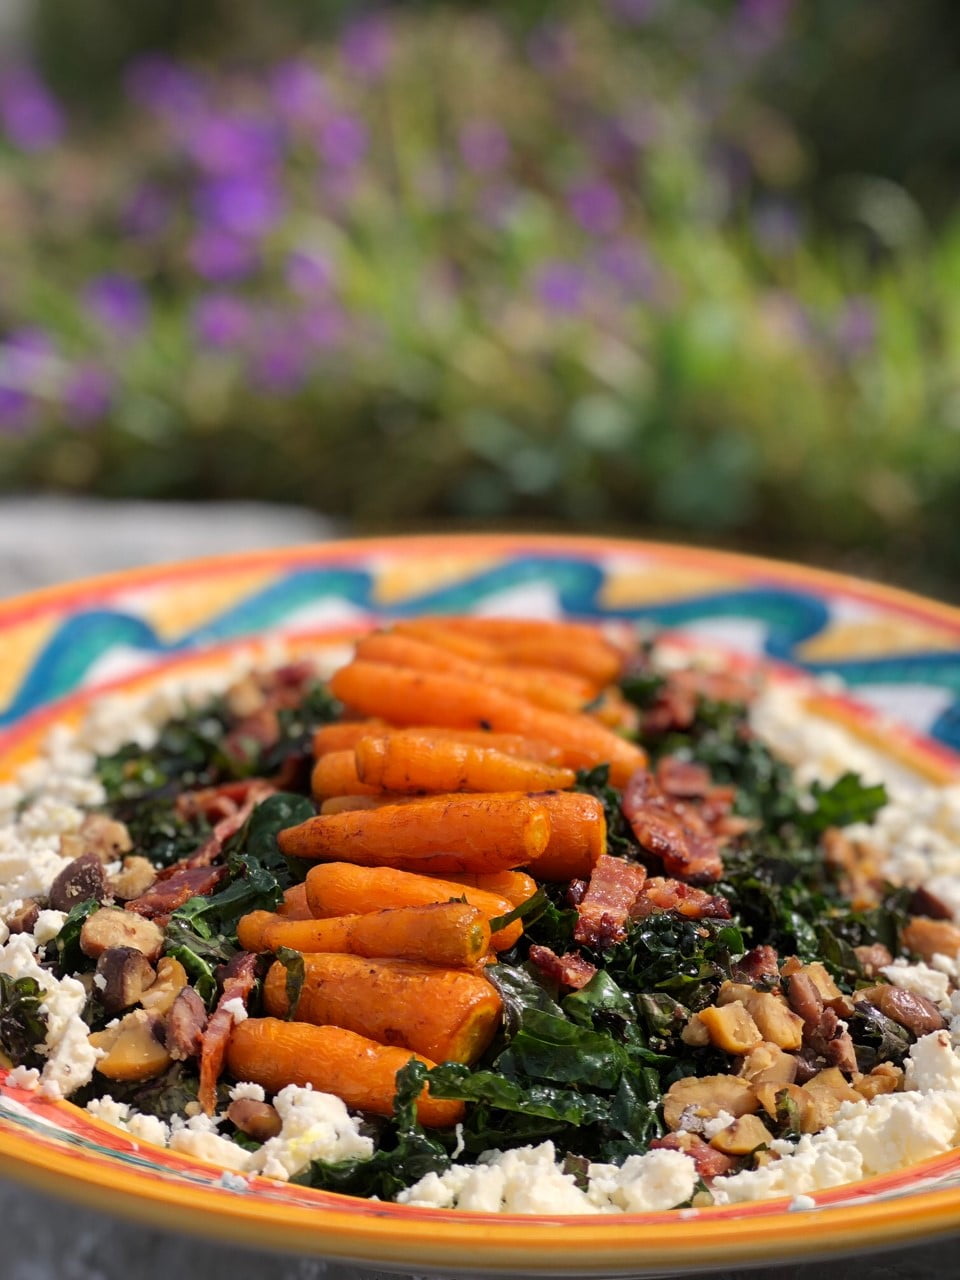 Honey Glazed Roasted Carrot and Kale Salad with Candied Bacon, Feta and Chestnuts